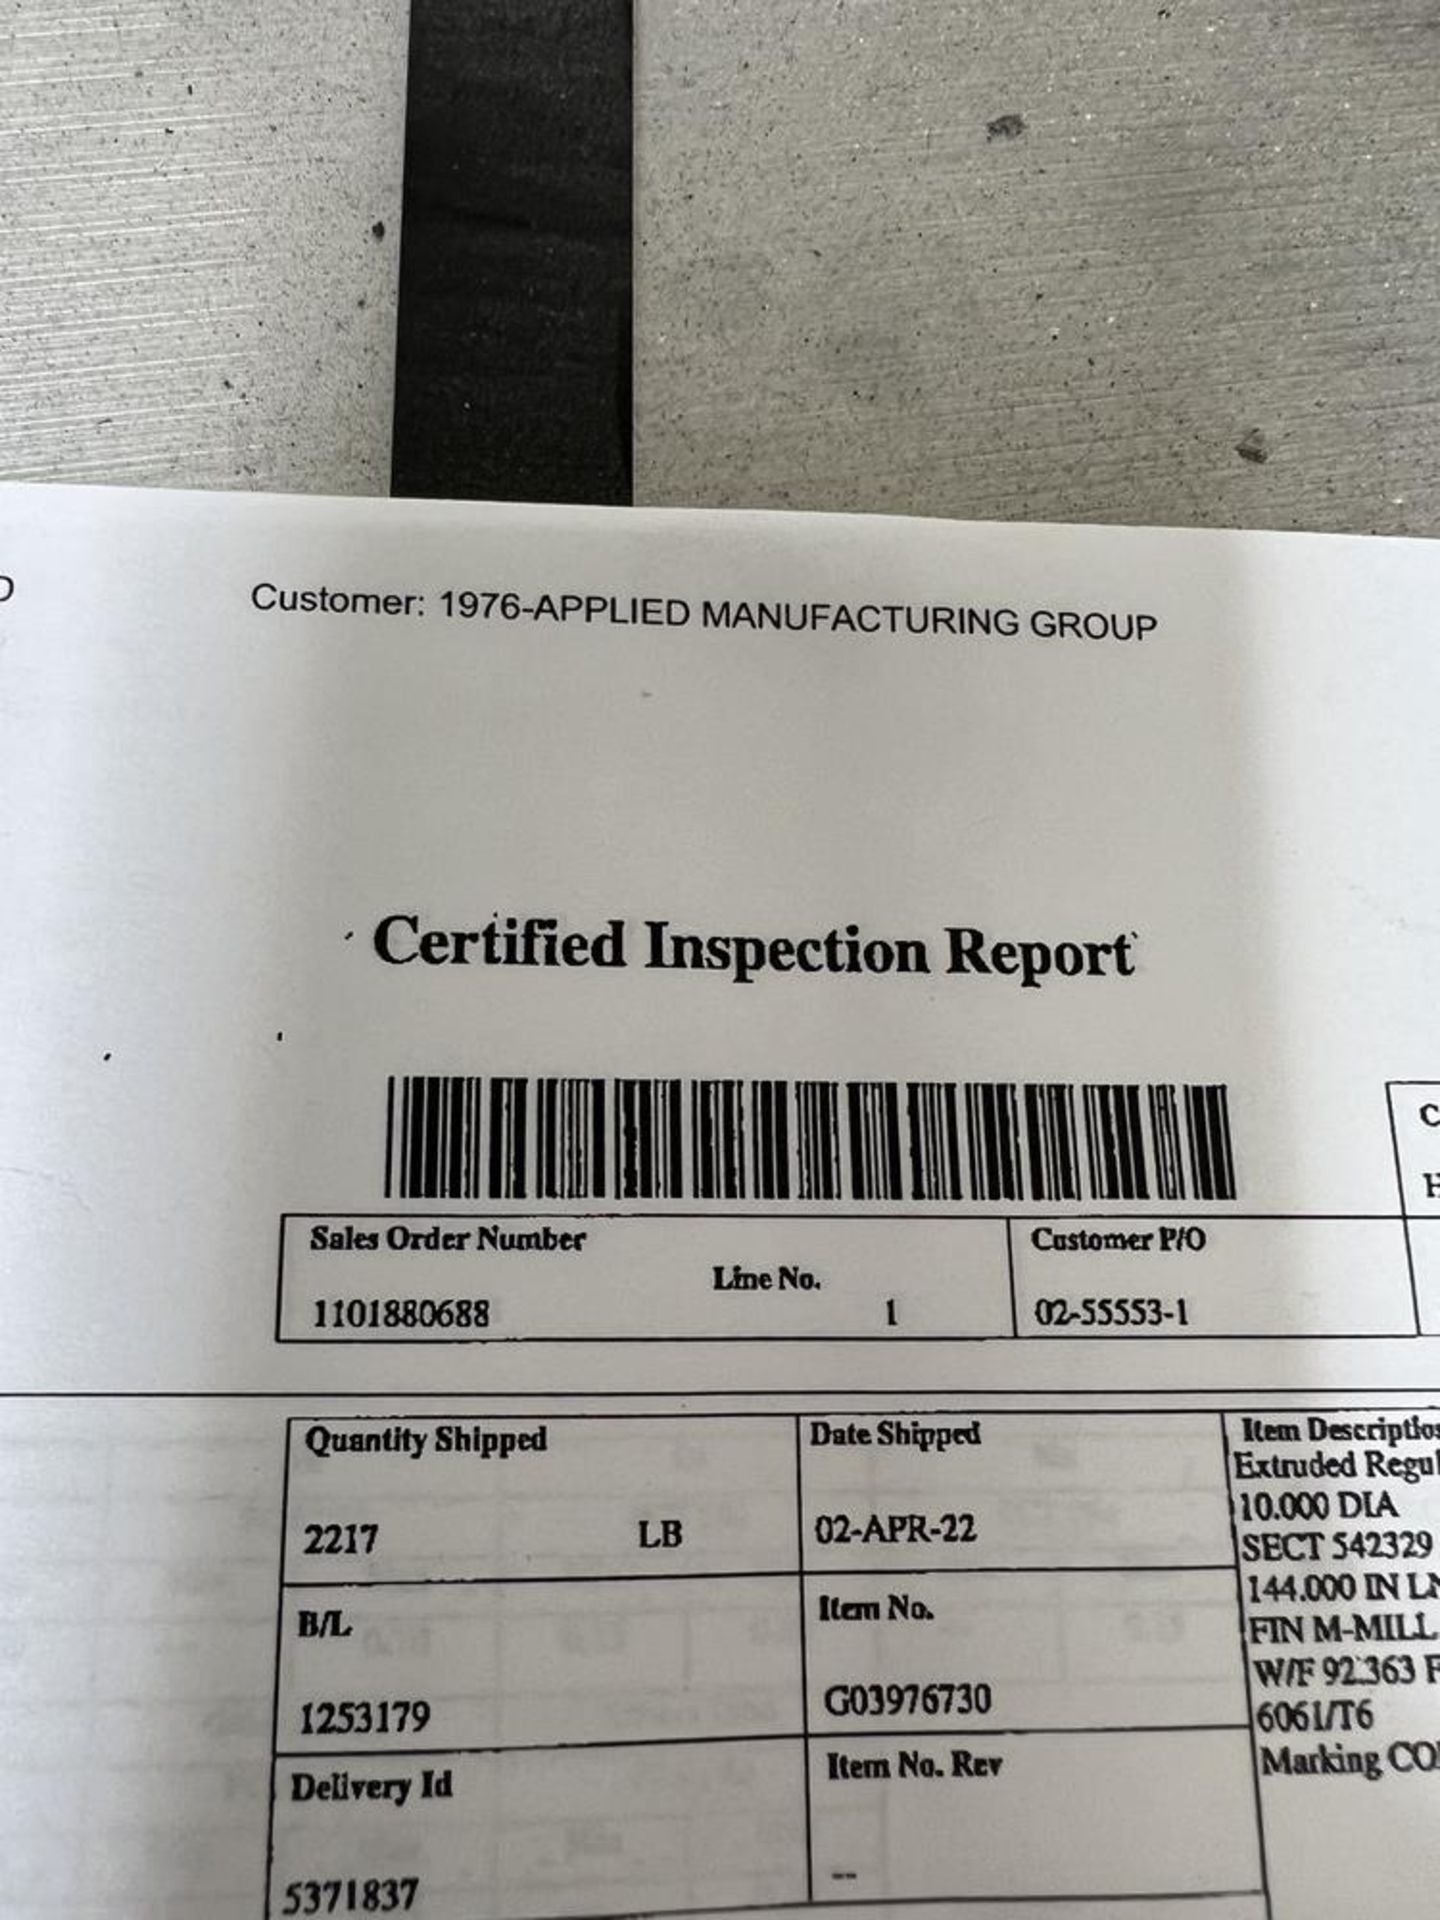 (24) Aluminum Round 6061 T6 Extruded 10" Dia x 11.75" With Certified Inspection Report 2169 Lbs - Image 5 of 6